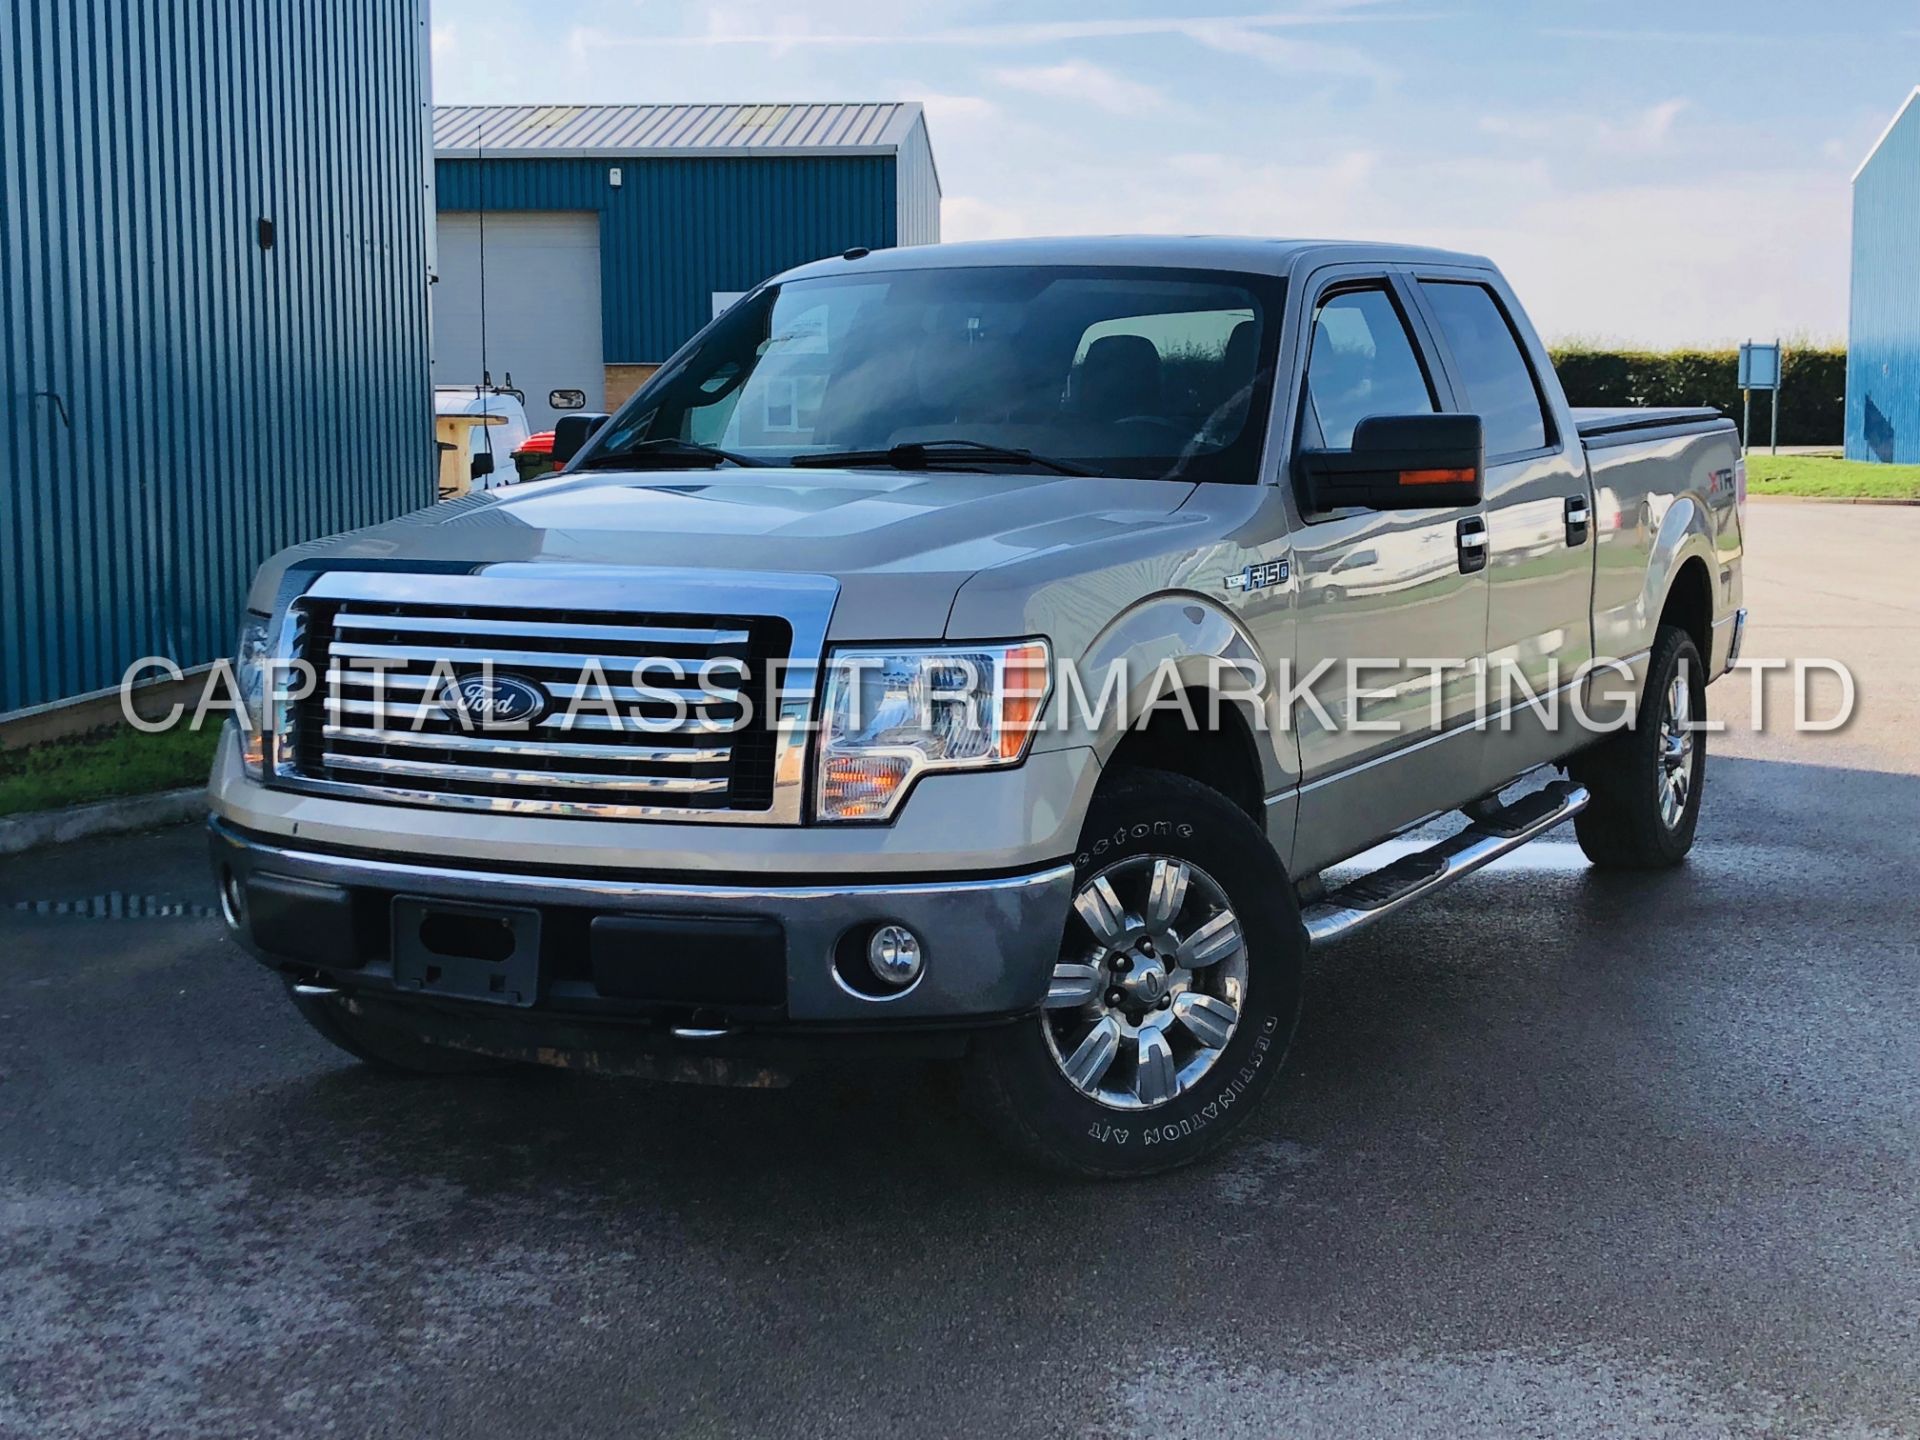 (ON SALE) FORD F-150 *XTR /EDITION* SUPER CREW CAB PICK-UP (2010) '4.6L V8 - AUTOMATIC'**6 SEAT**4x4